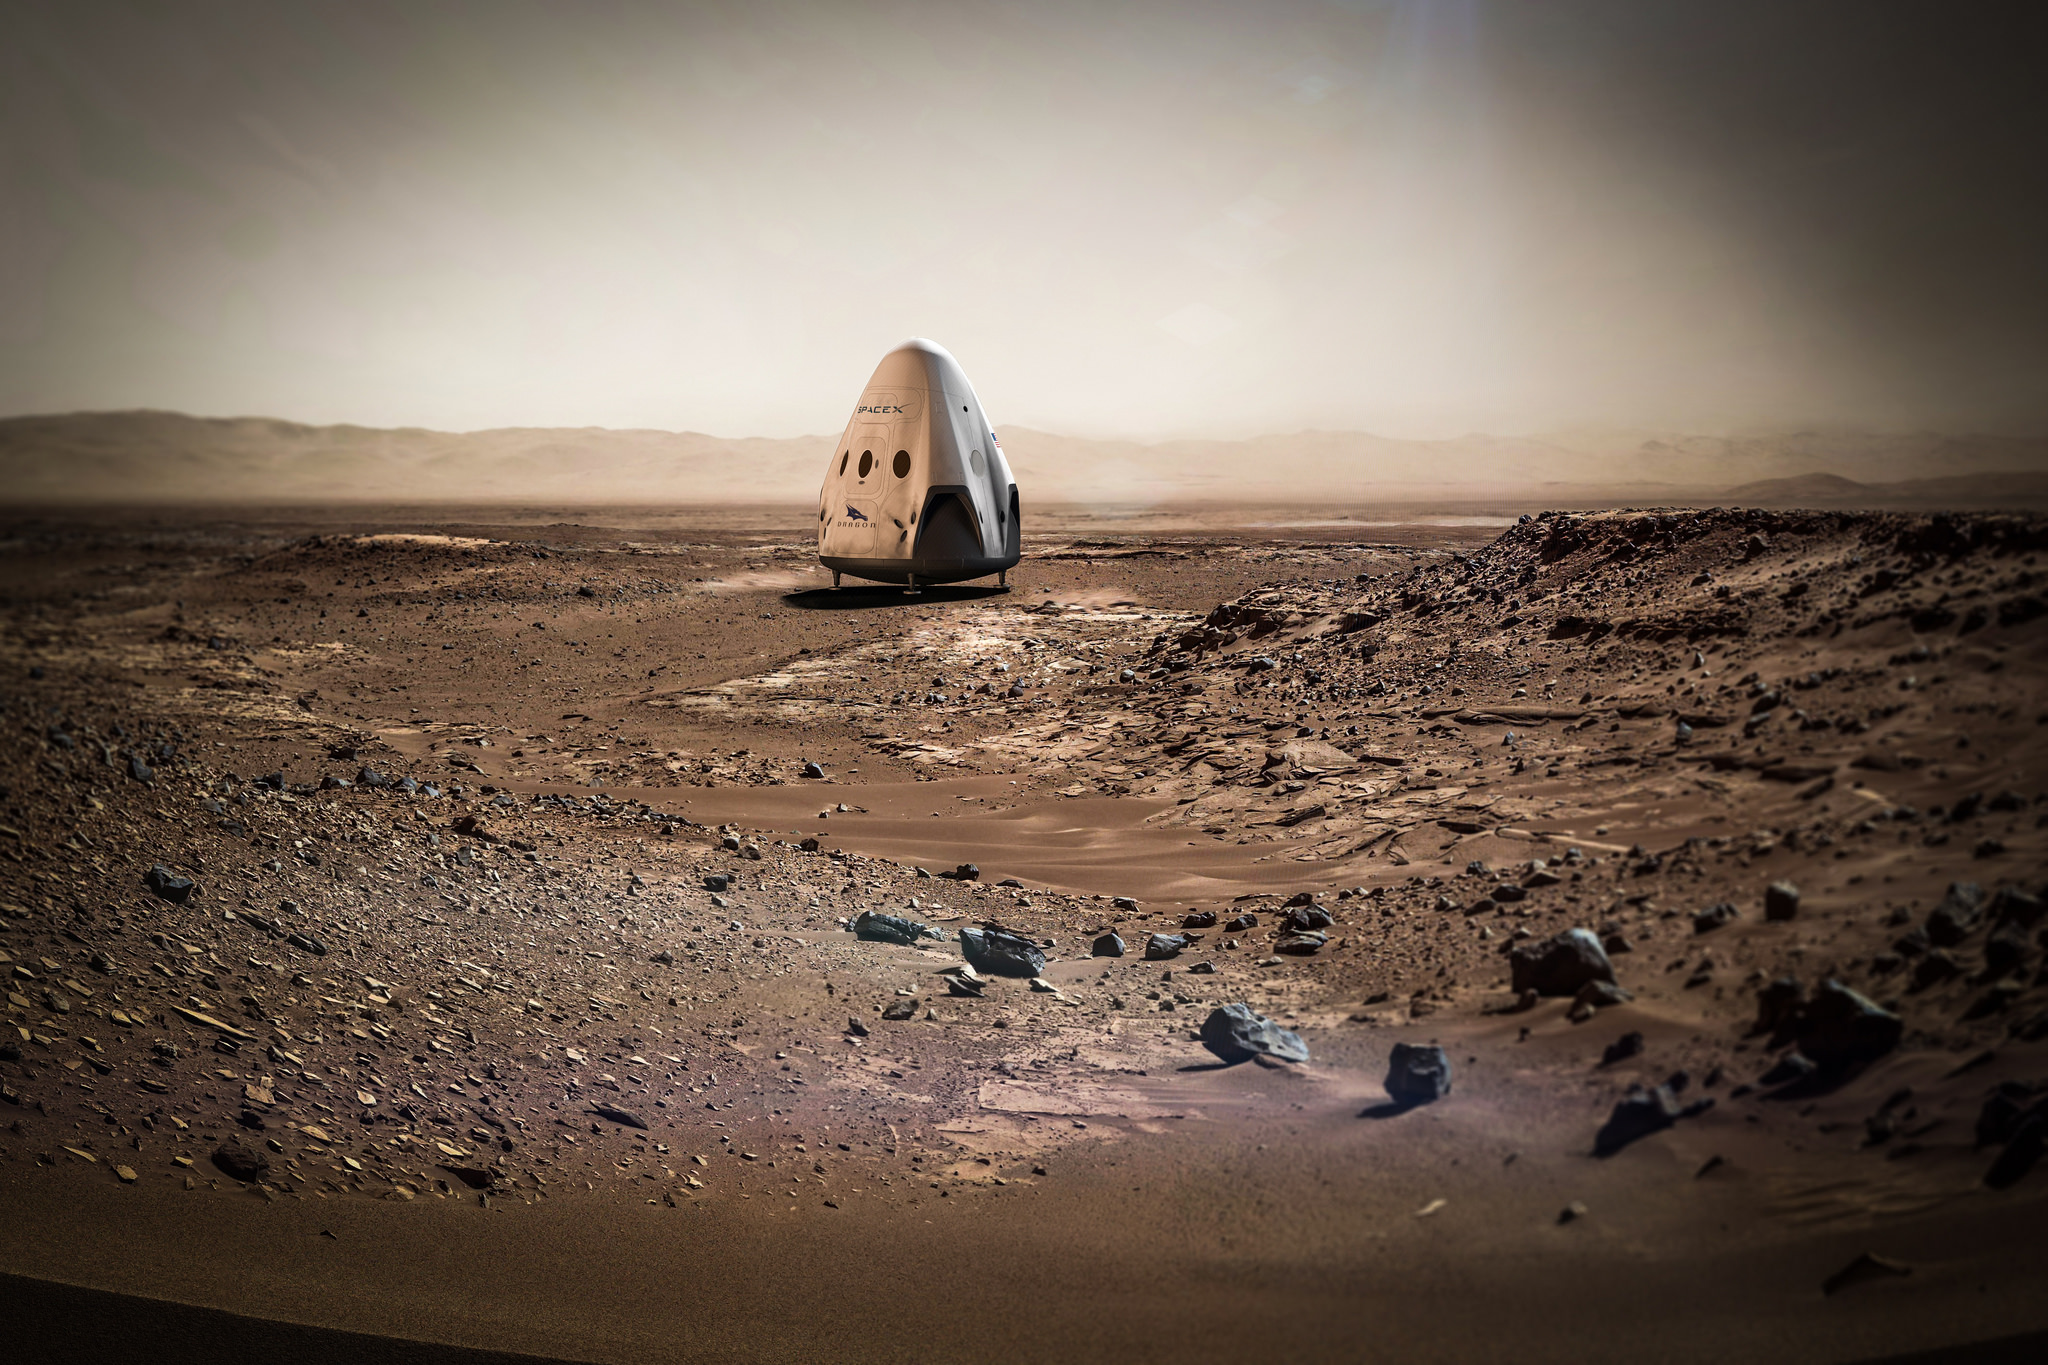 SpaceX's Red Dragon: A Private Mars Mission Plan in Pictures